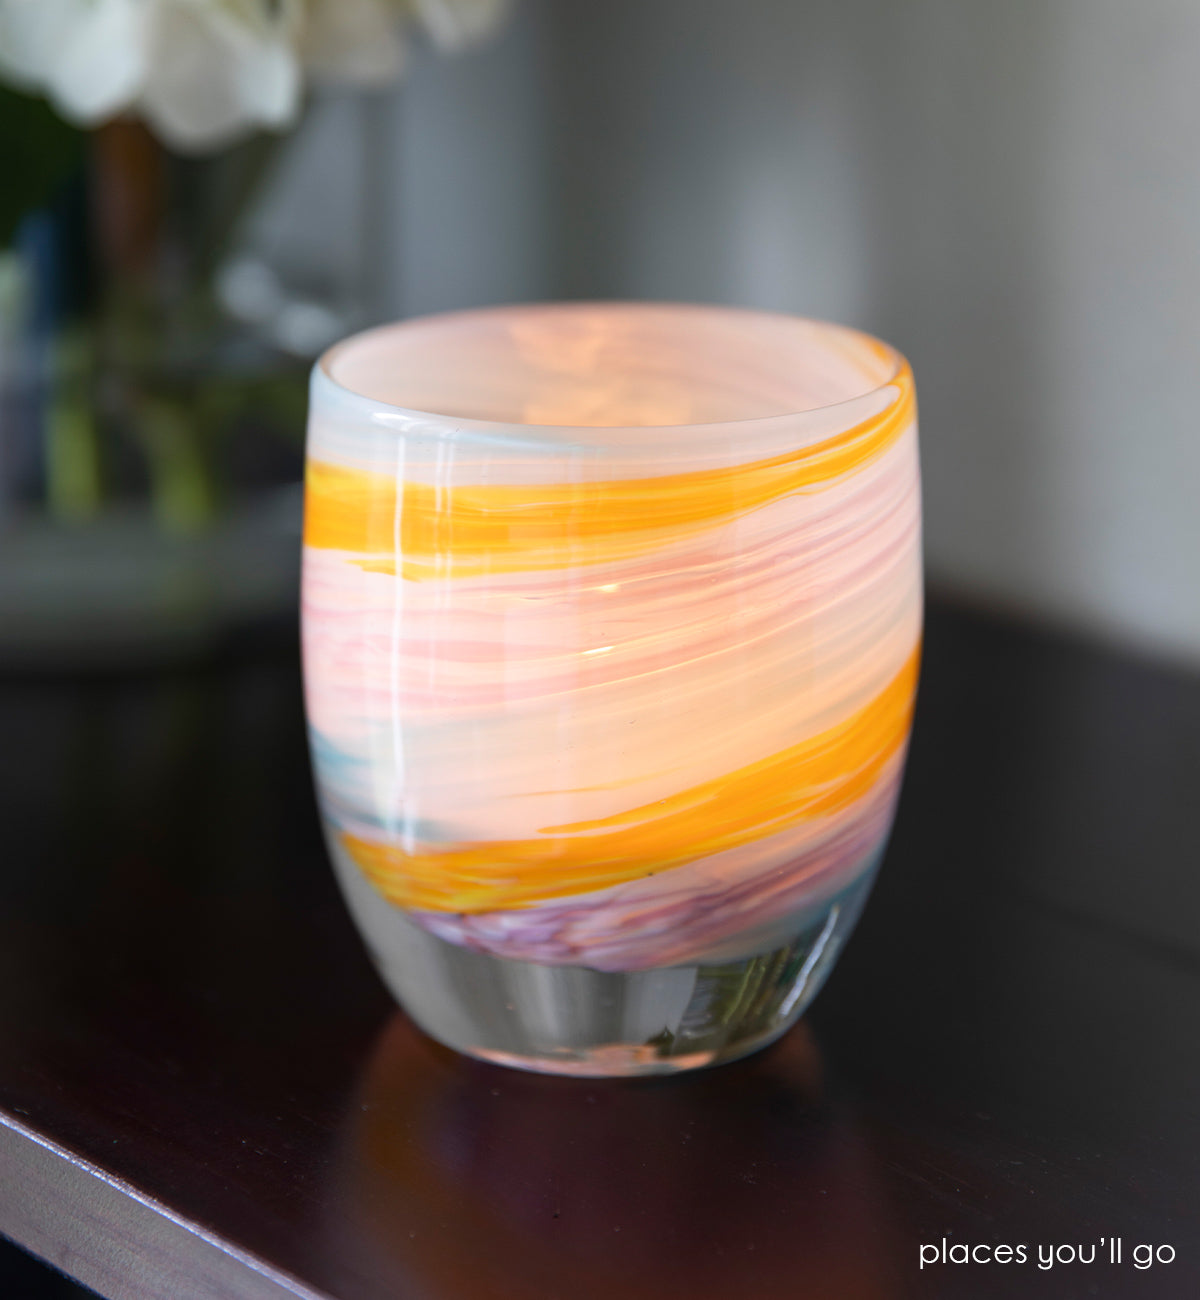 places you'll go hand-blown multi-colored yellow, white, blue, purple swirl hand-blown glass votive candle holder set on a dark brown wood table.